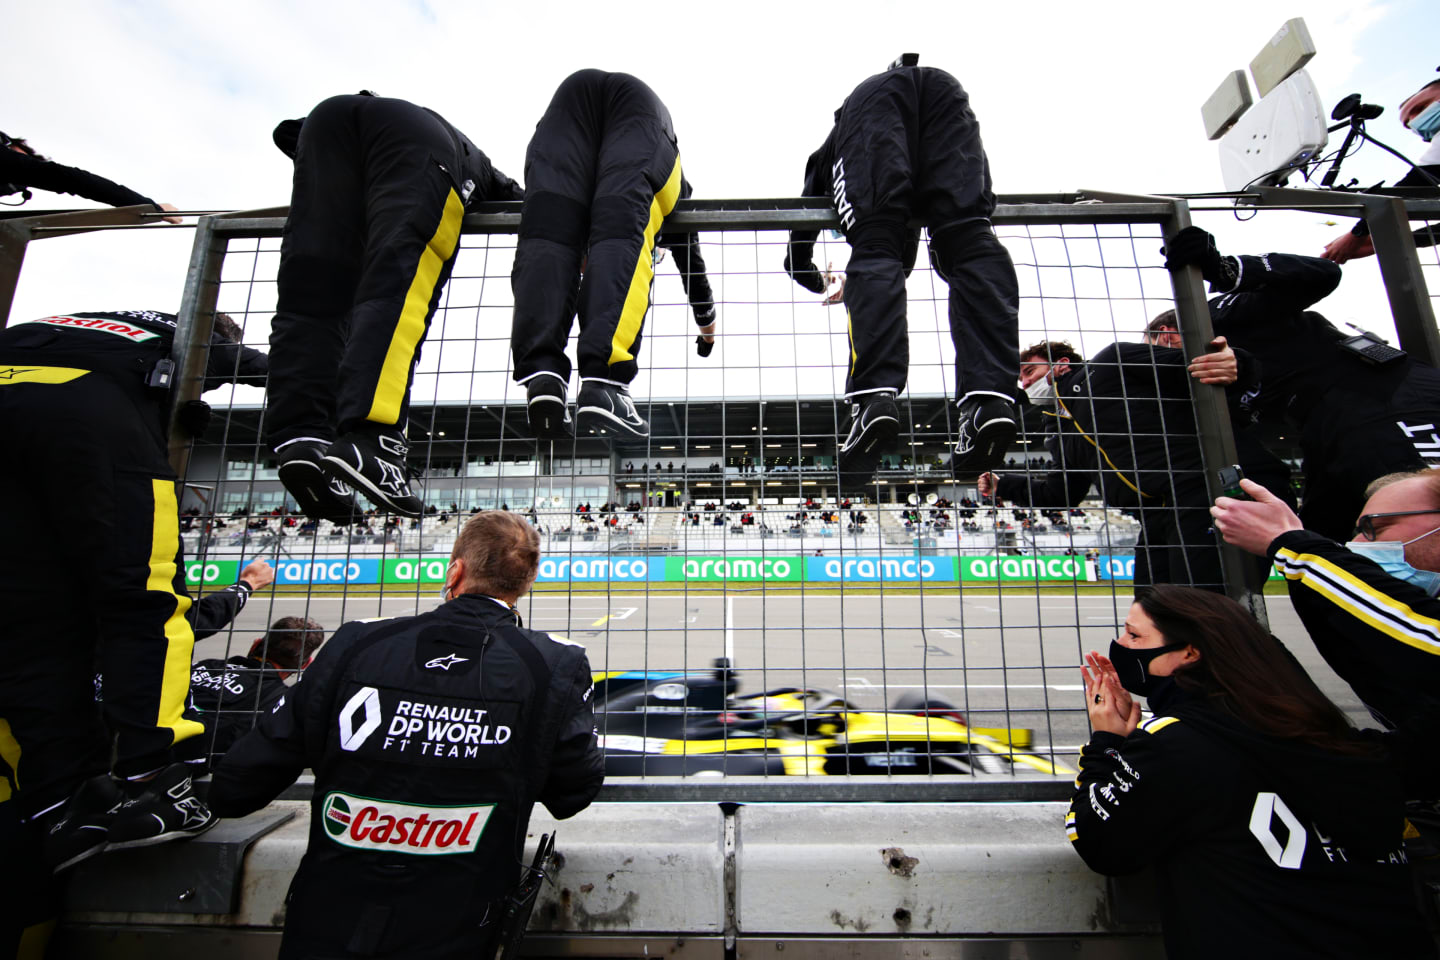 NUERBURG, GERMANY - OCTOBER 11: Third placed Daniel Ricciardo of Australia driving the (3) Renault Sport Formula One Team RS20 crosses the line in front of his team celebrating on the pitwall during the F1 Eifel Grand Prix at Nuerburgring on October 11, 2020 in Nuerburg, Germany. (Photo by Peter Fox/Getty Images)